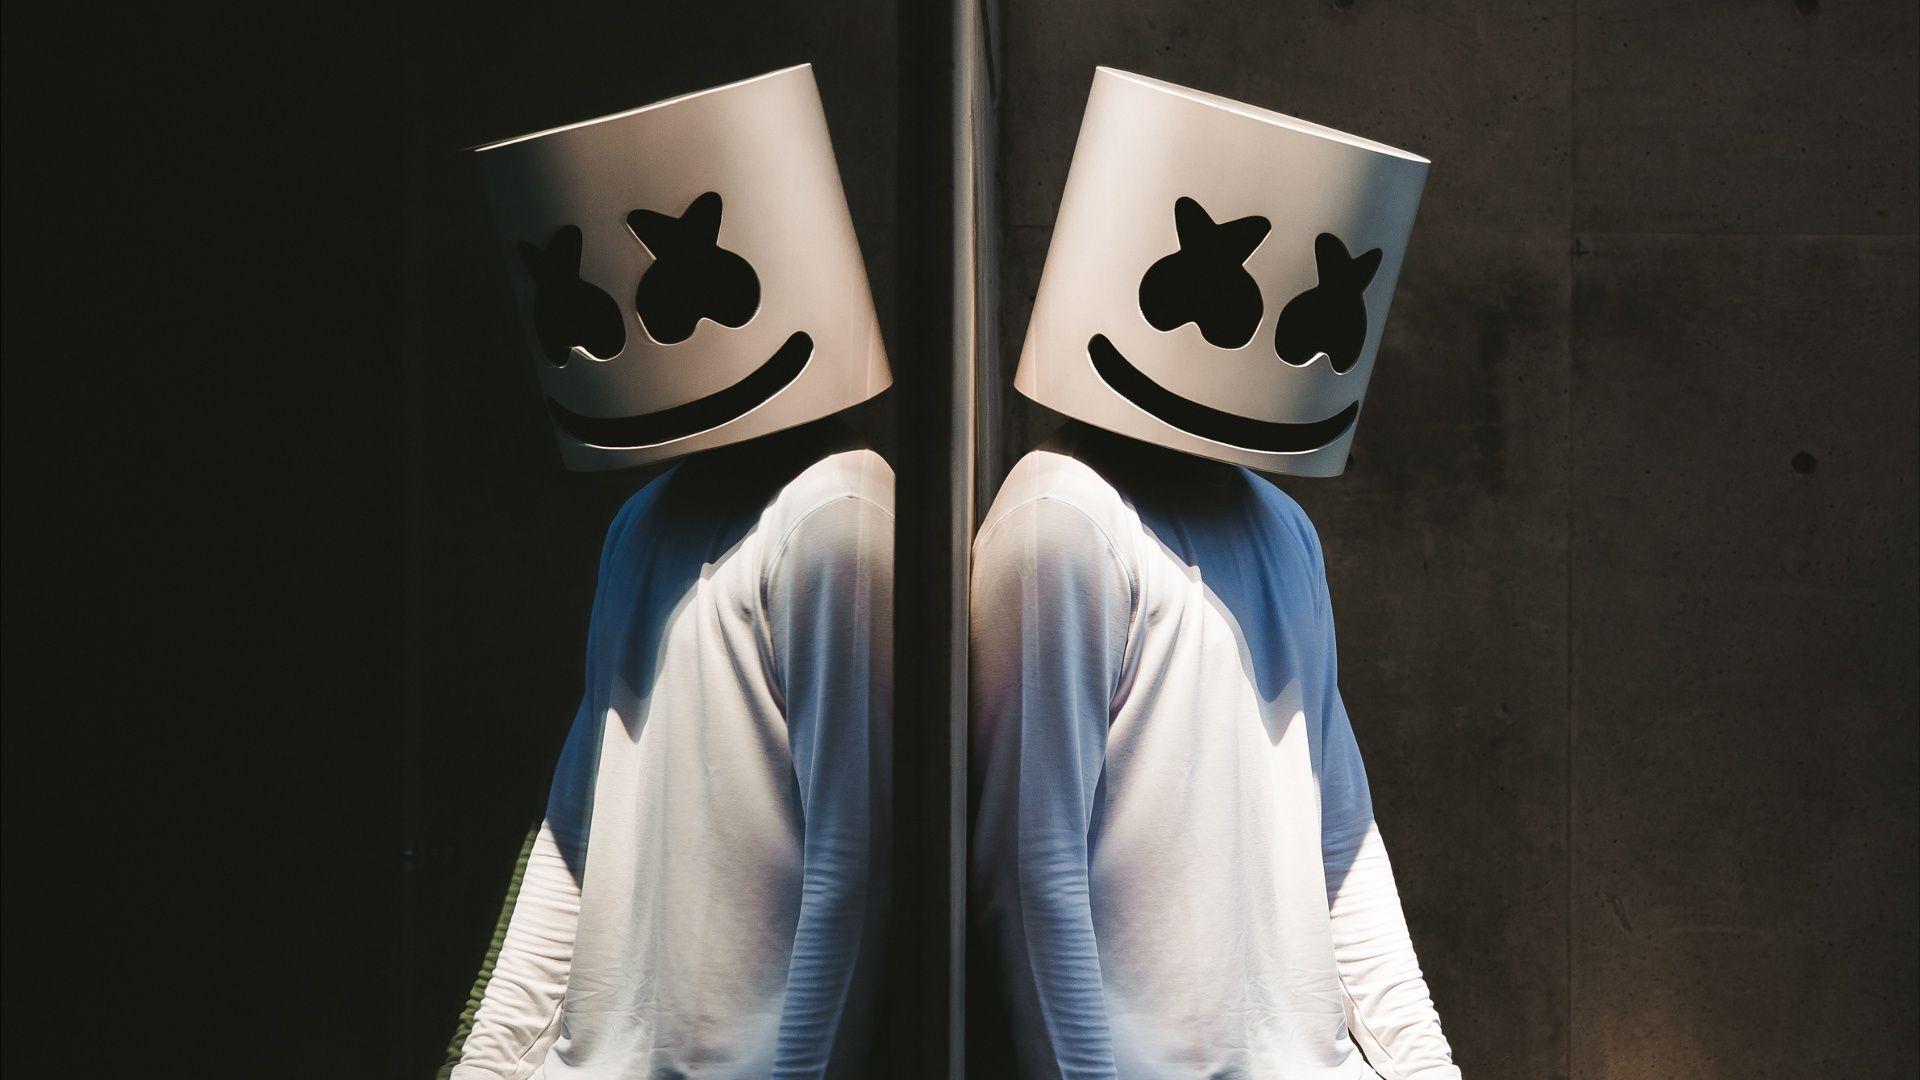 Marshmello launches his very own clothing brand